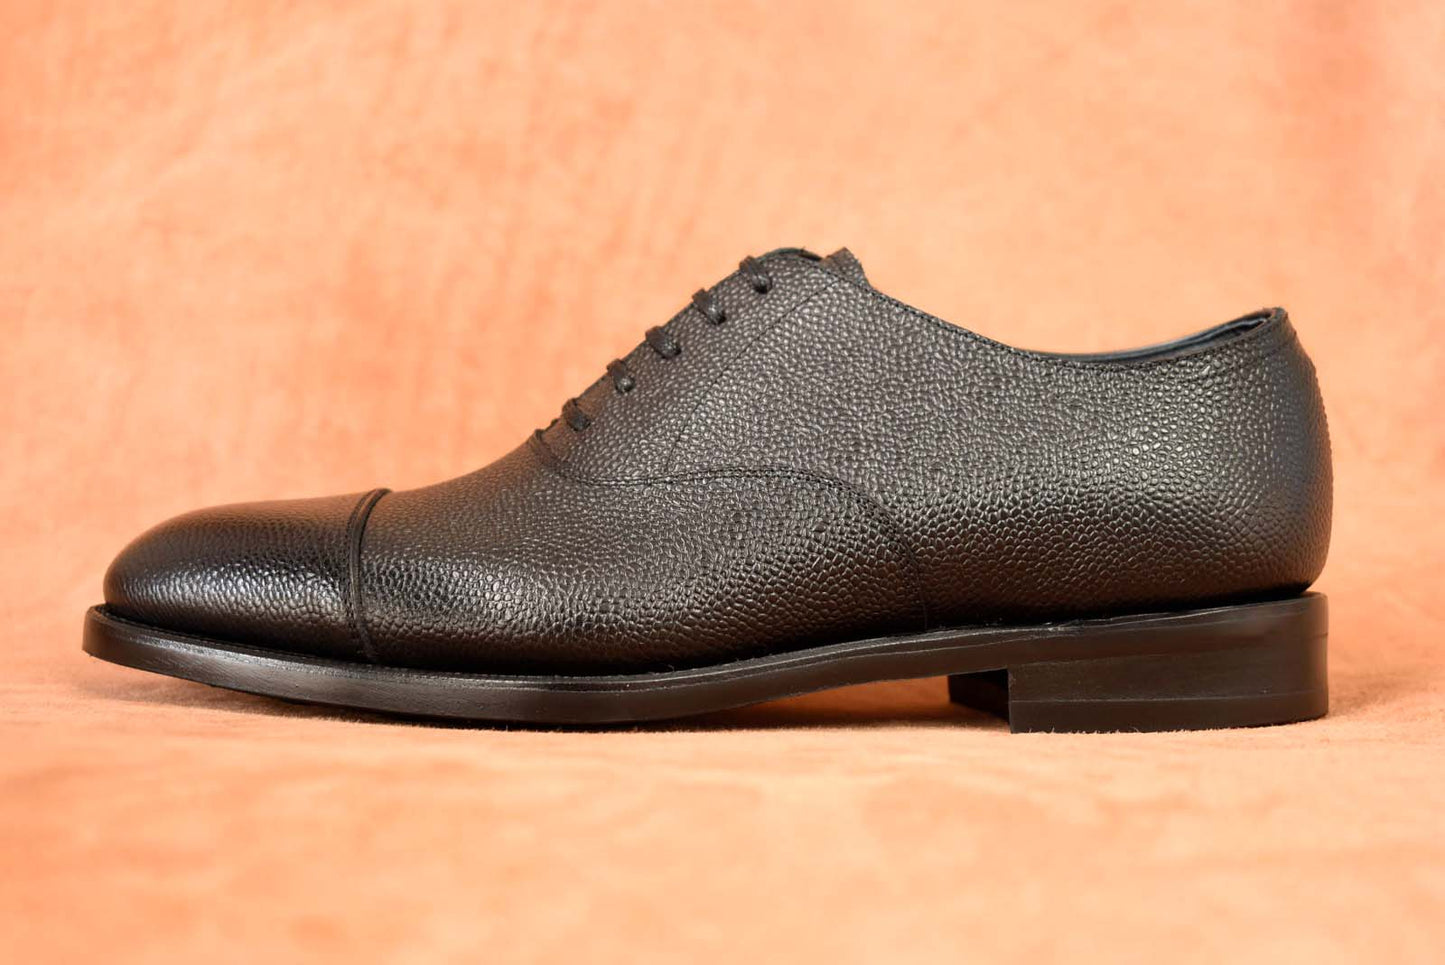 “Fortis” Cap toe, Black Dress Shoes, Grained Leather, Goodyear welted, US size 5 1/2 ~ 10